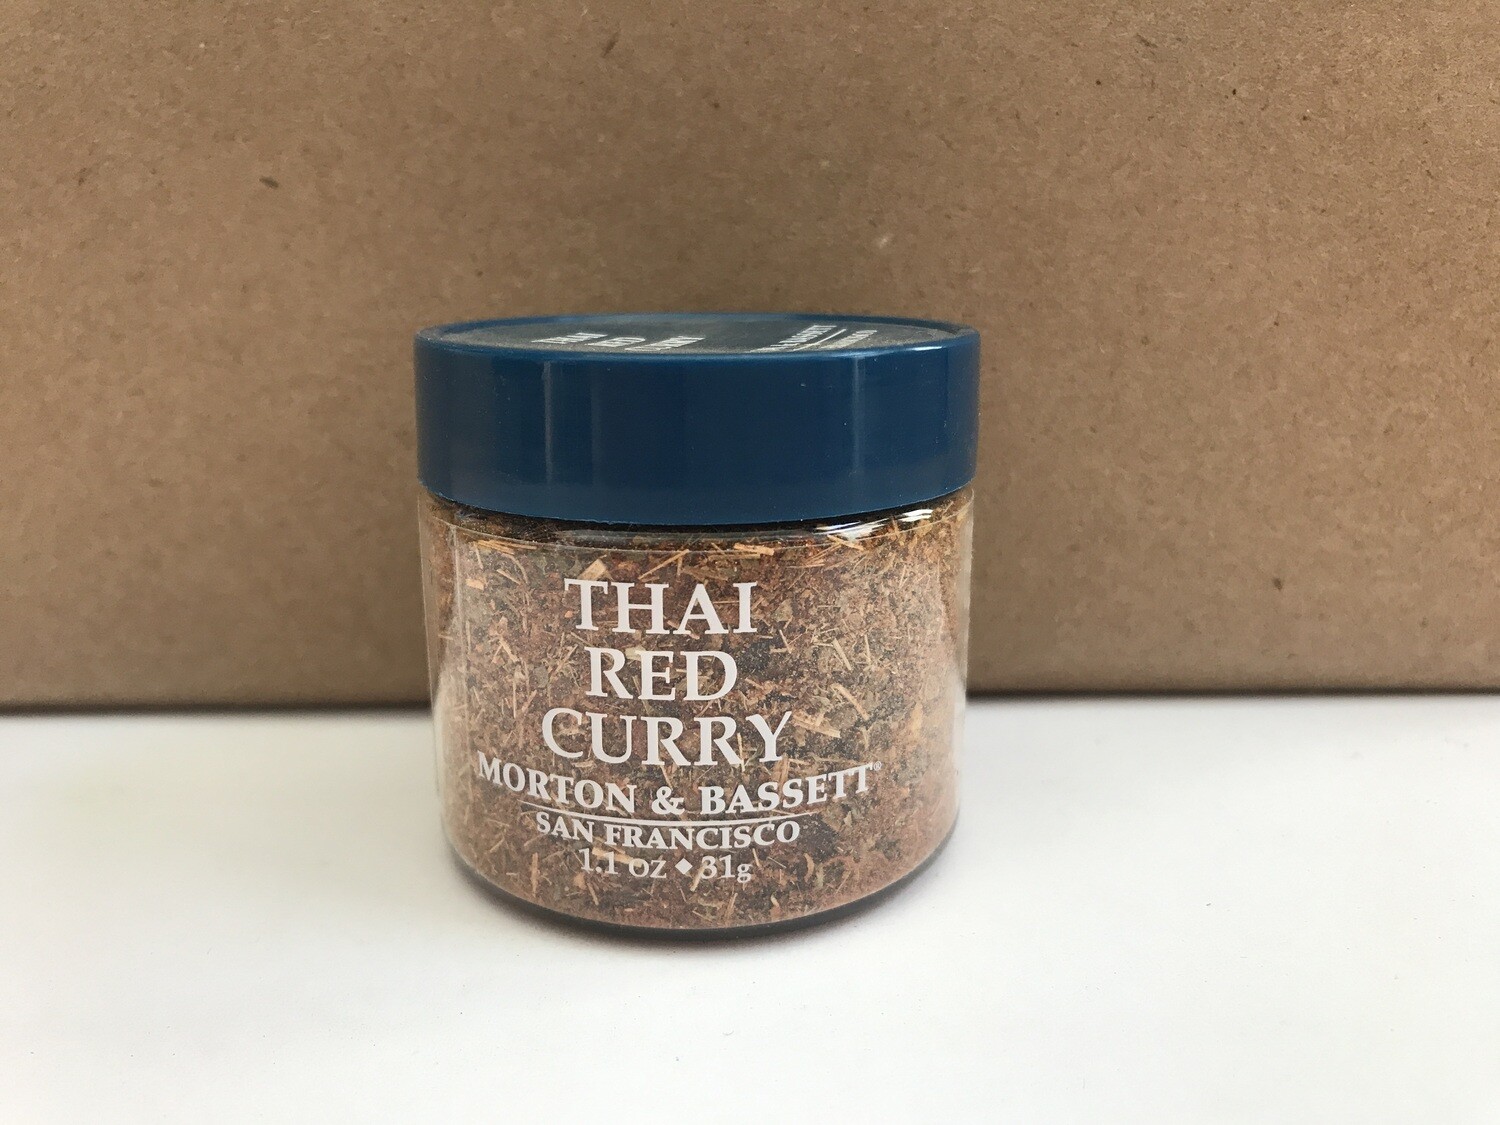 Grocery / Spice / Morton & Bassett Curry Thai Red, 1.1 oz